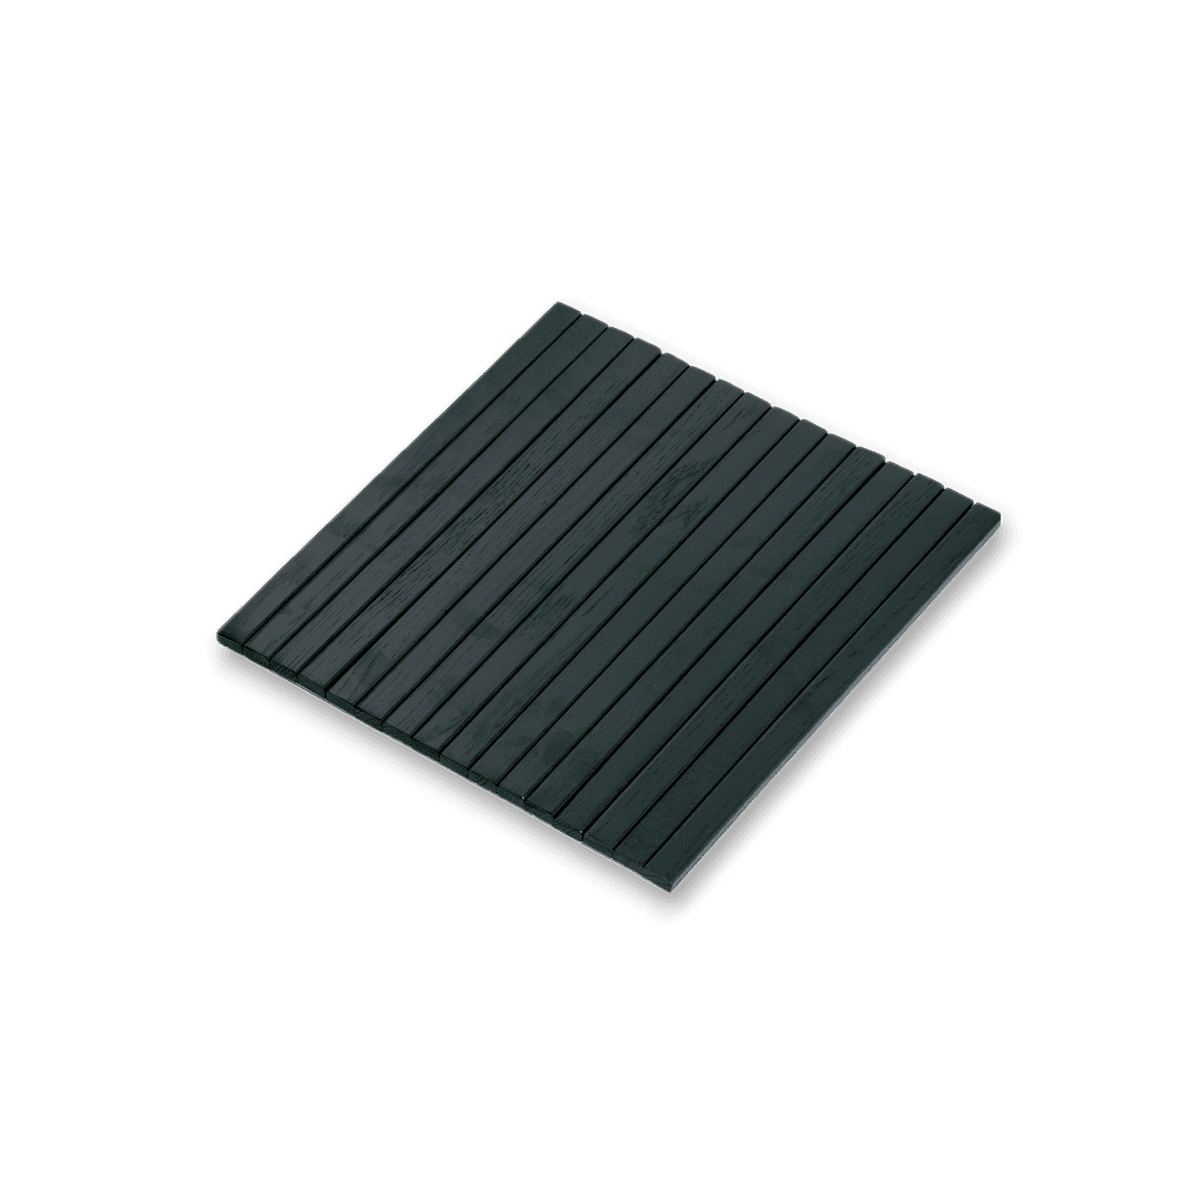 Wooden Tray For Sofas - Black